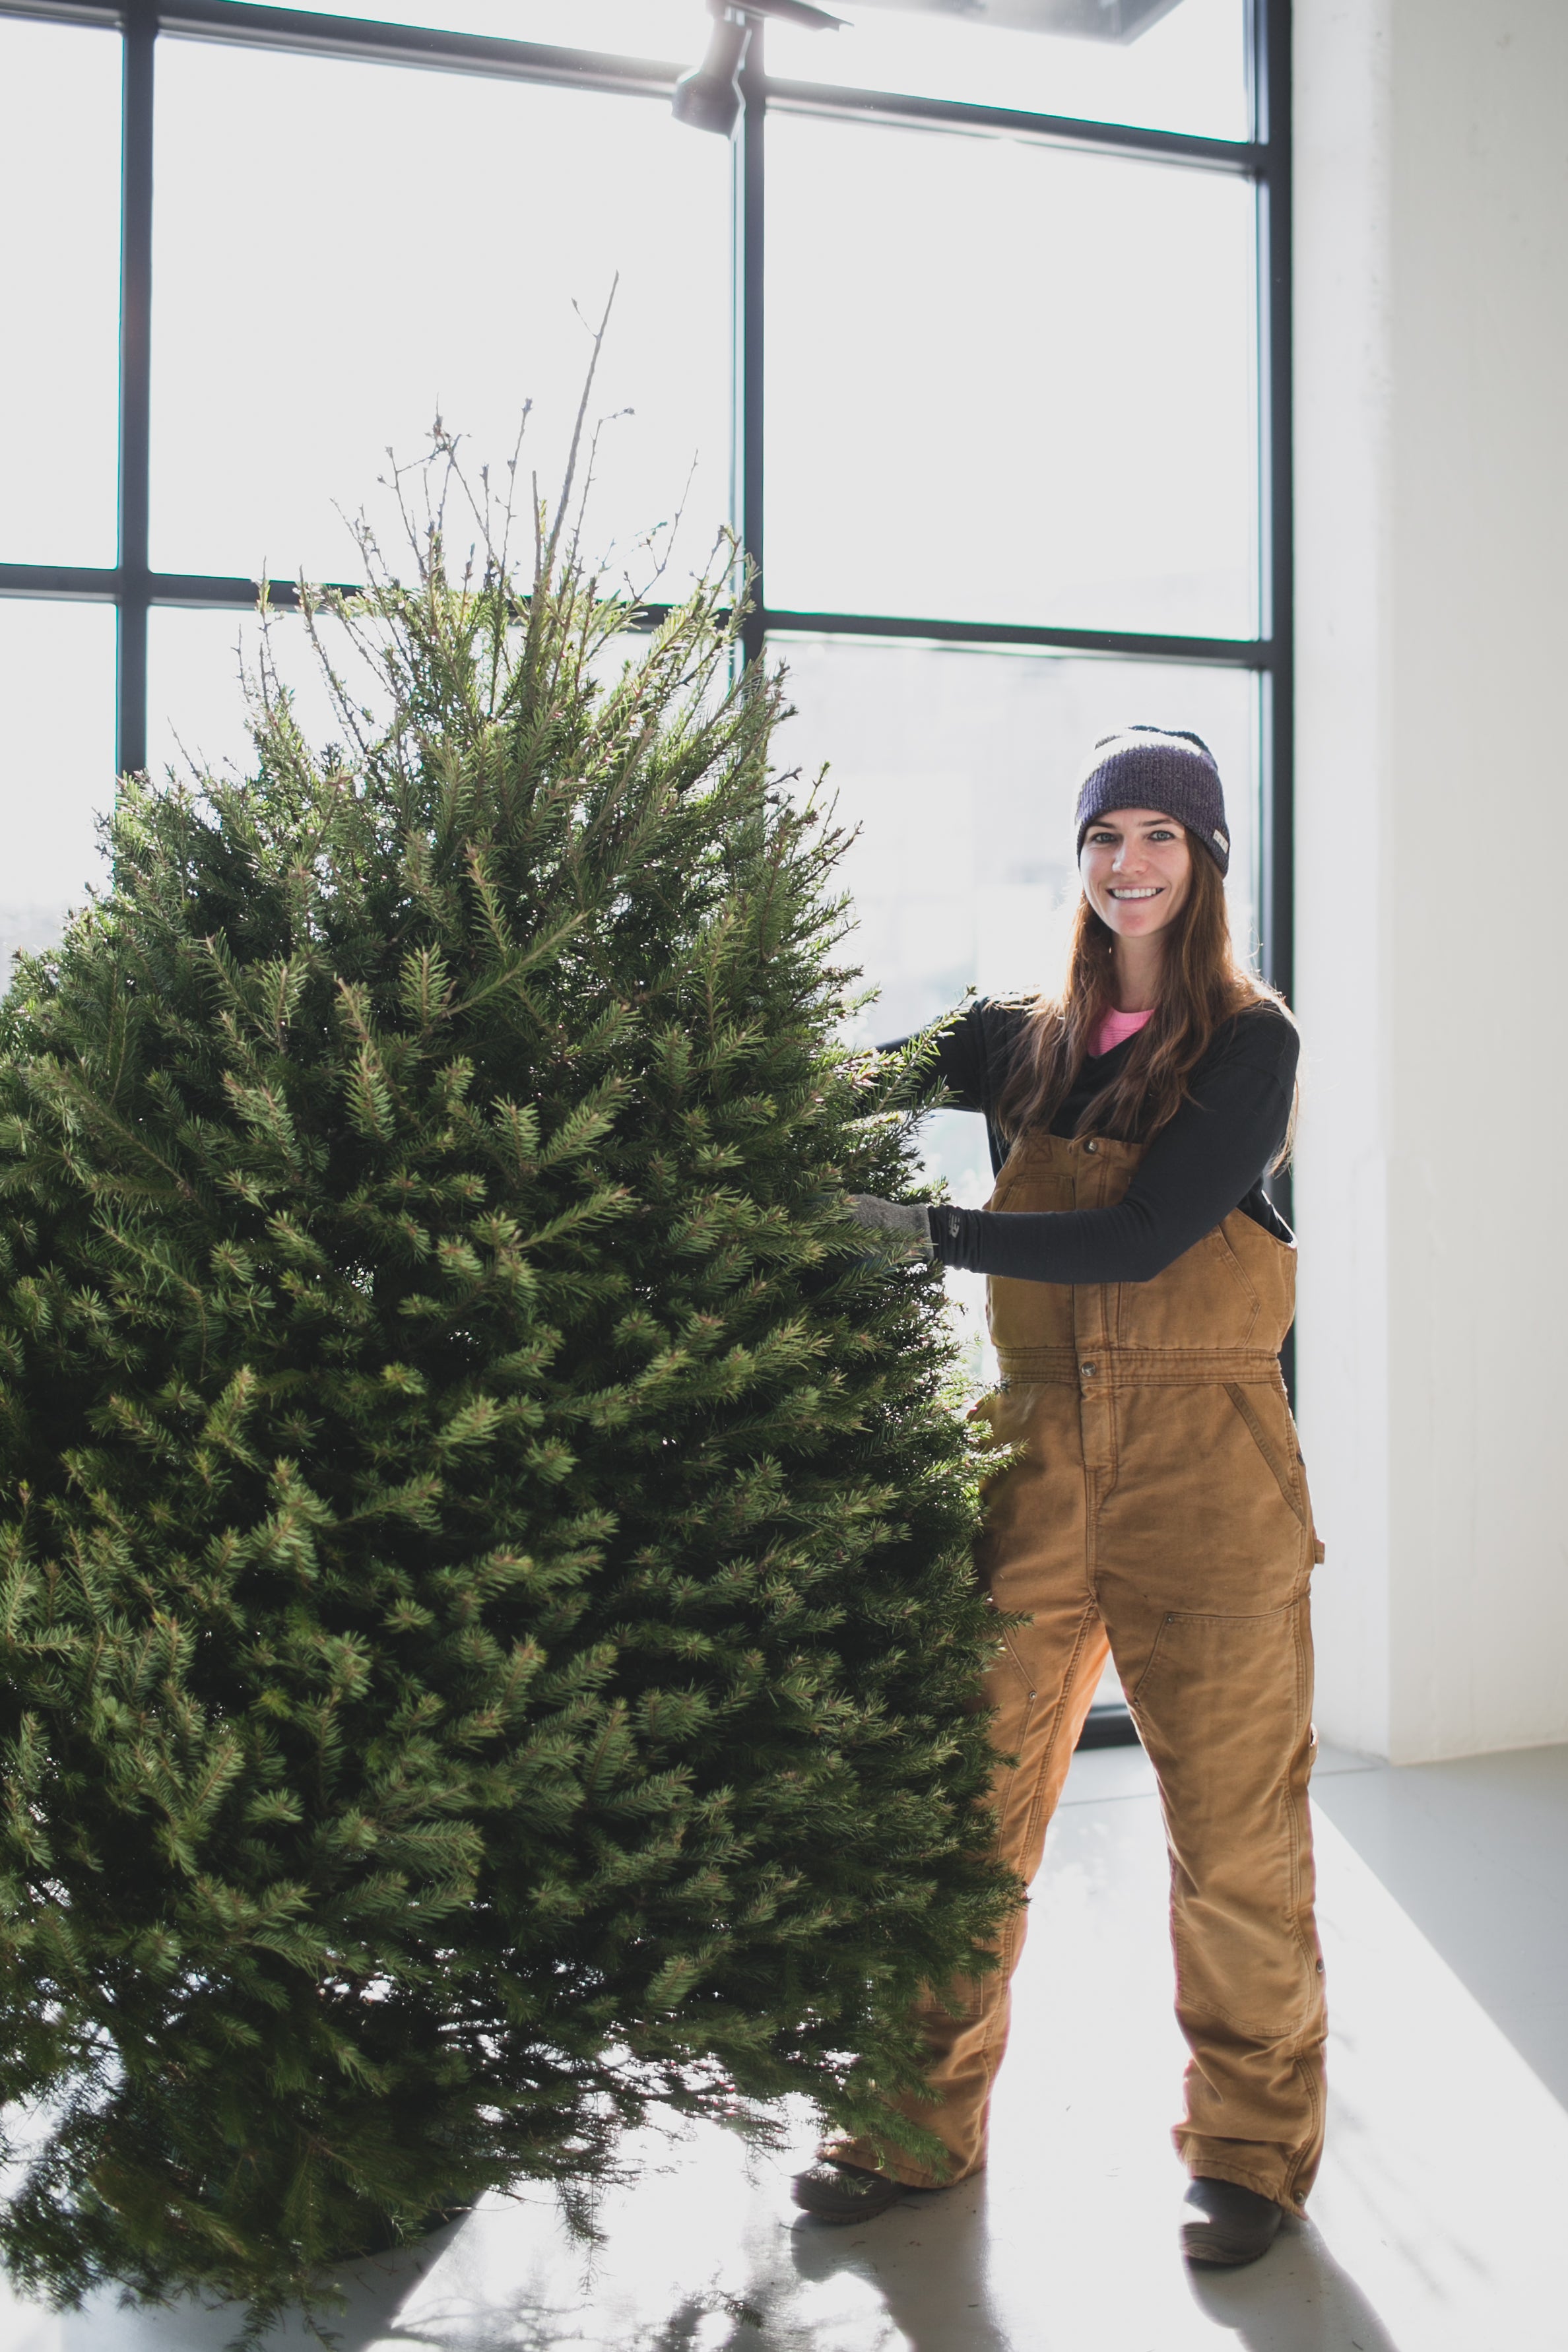 Fraser Fir Christmas Tree Delivery in Greater Philadelphia – The Christmas Tree Stand